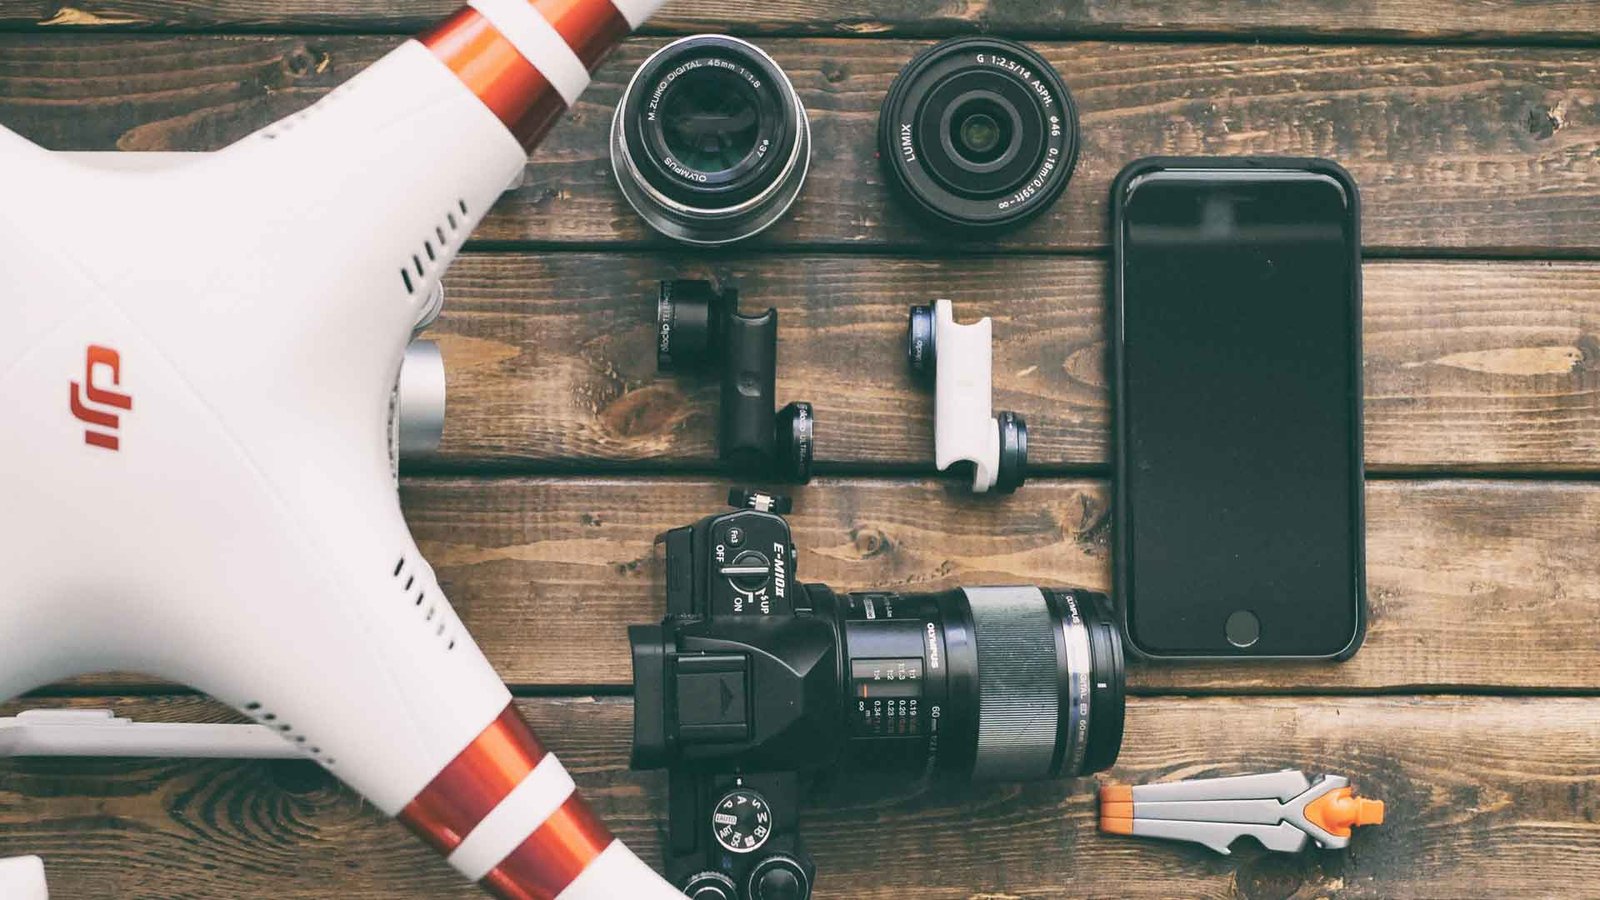 The Greatest Drones plus Accessories for Filmmaking